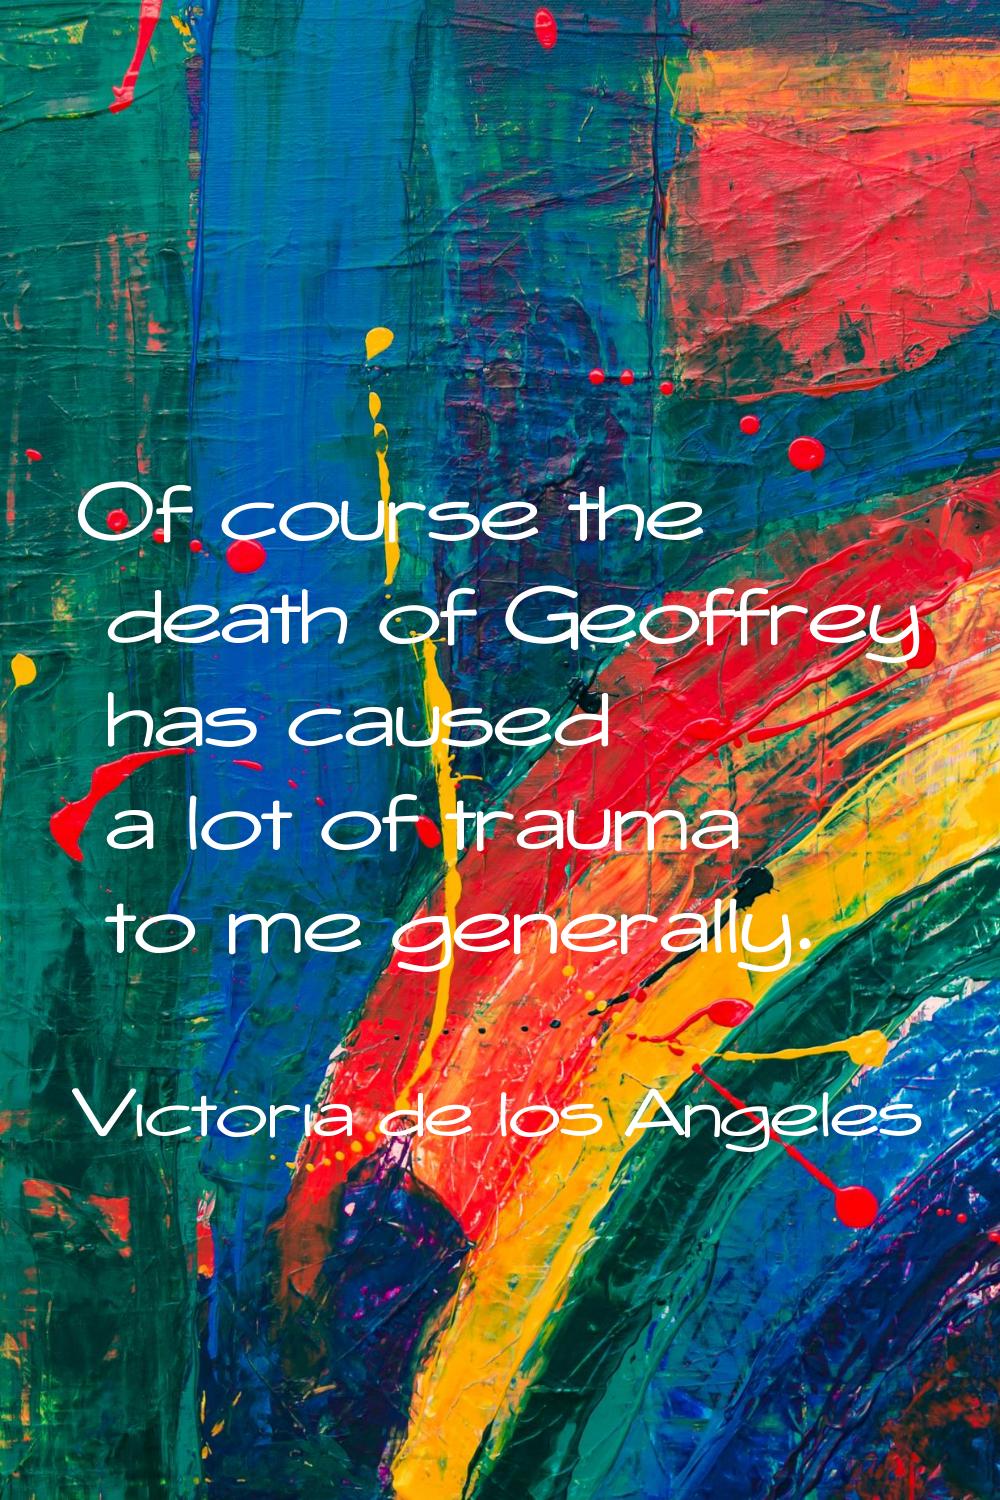 Of course the death of Geoffrey has caused a lot of trauma to me generally.